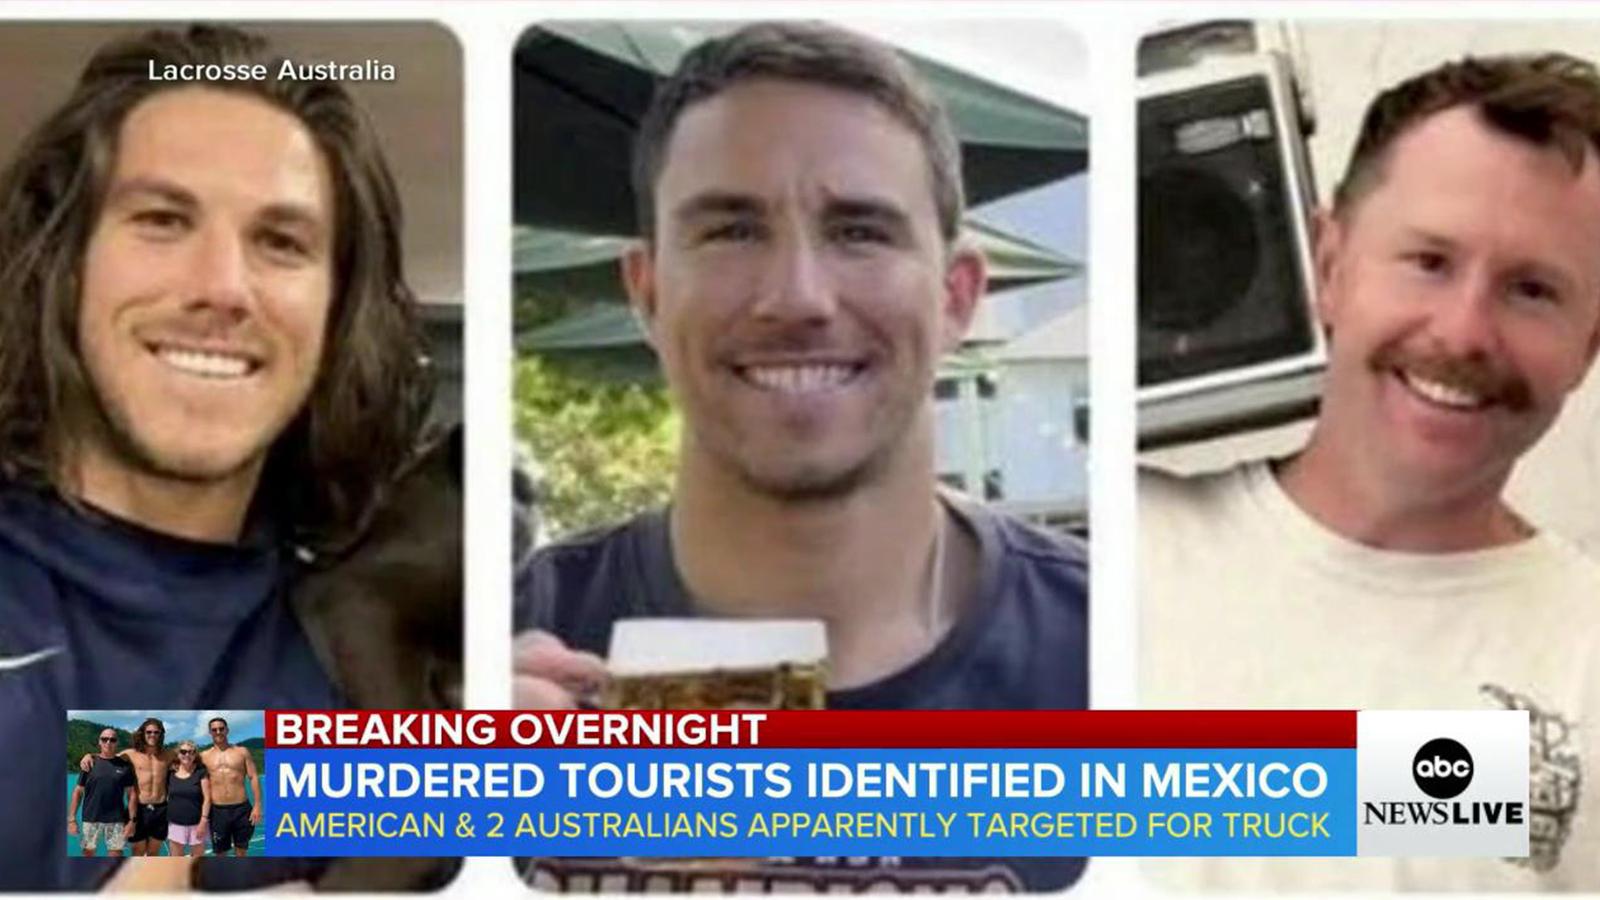 3 bodies found in Mexico were identified as Australian and American surfers